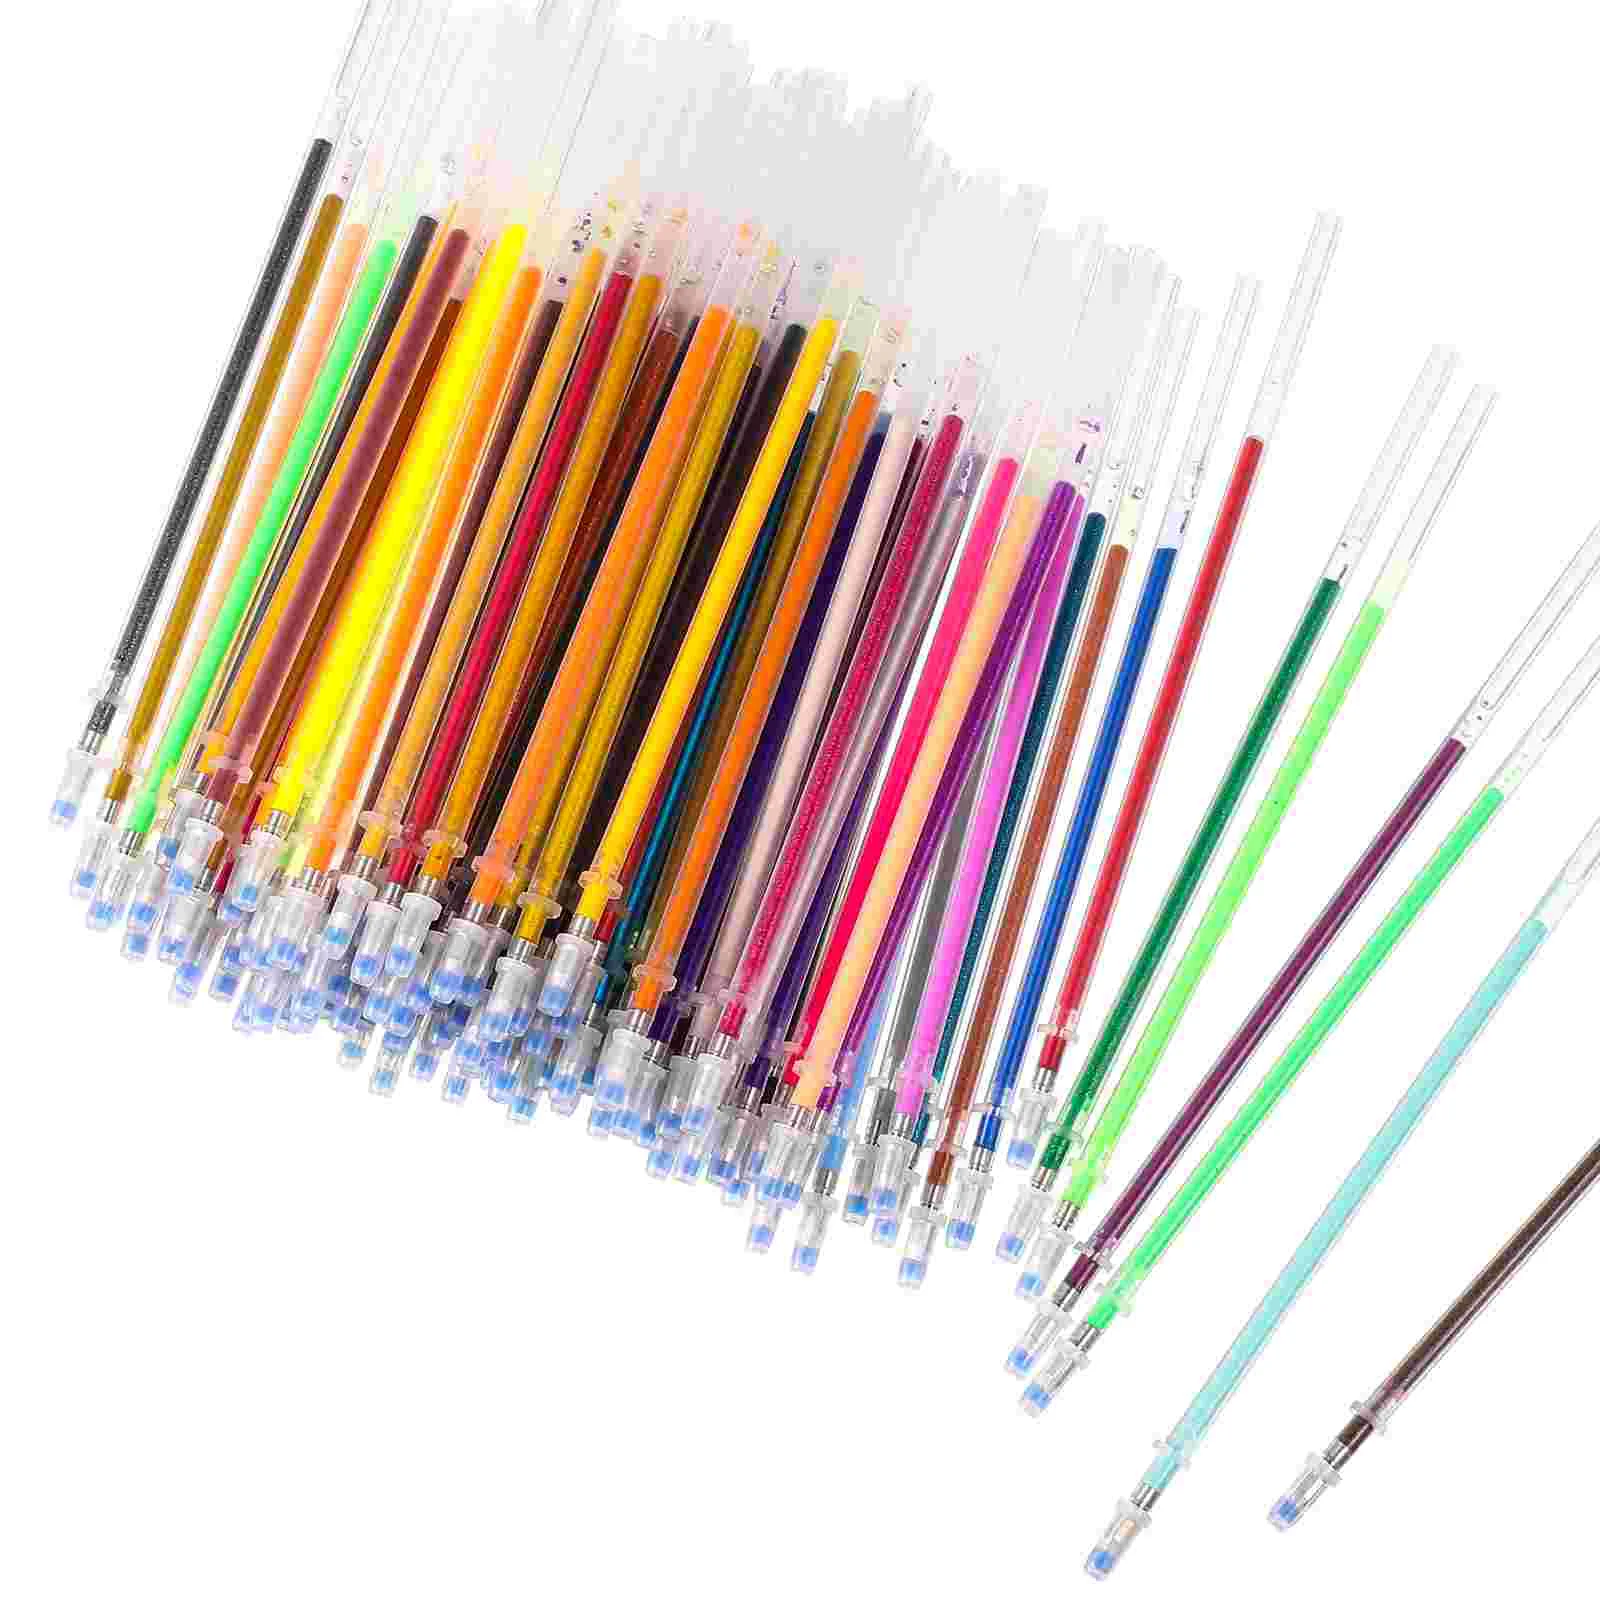 

Colorful Gel Come Pen Pen Student Stationery Office Supplies for Doodling Drawing (Mixed Color)